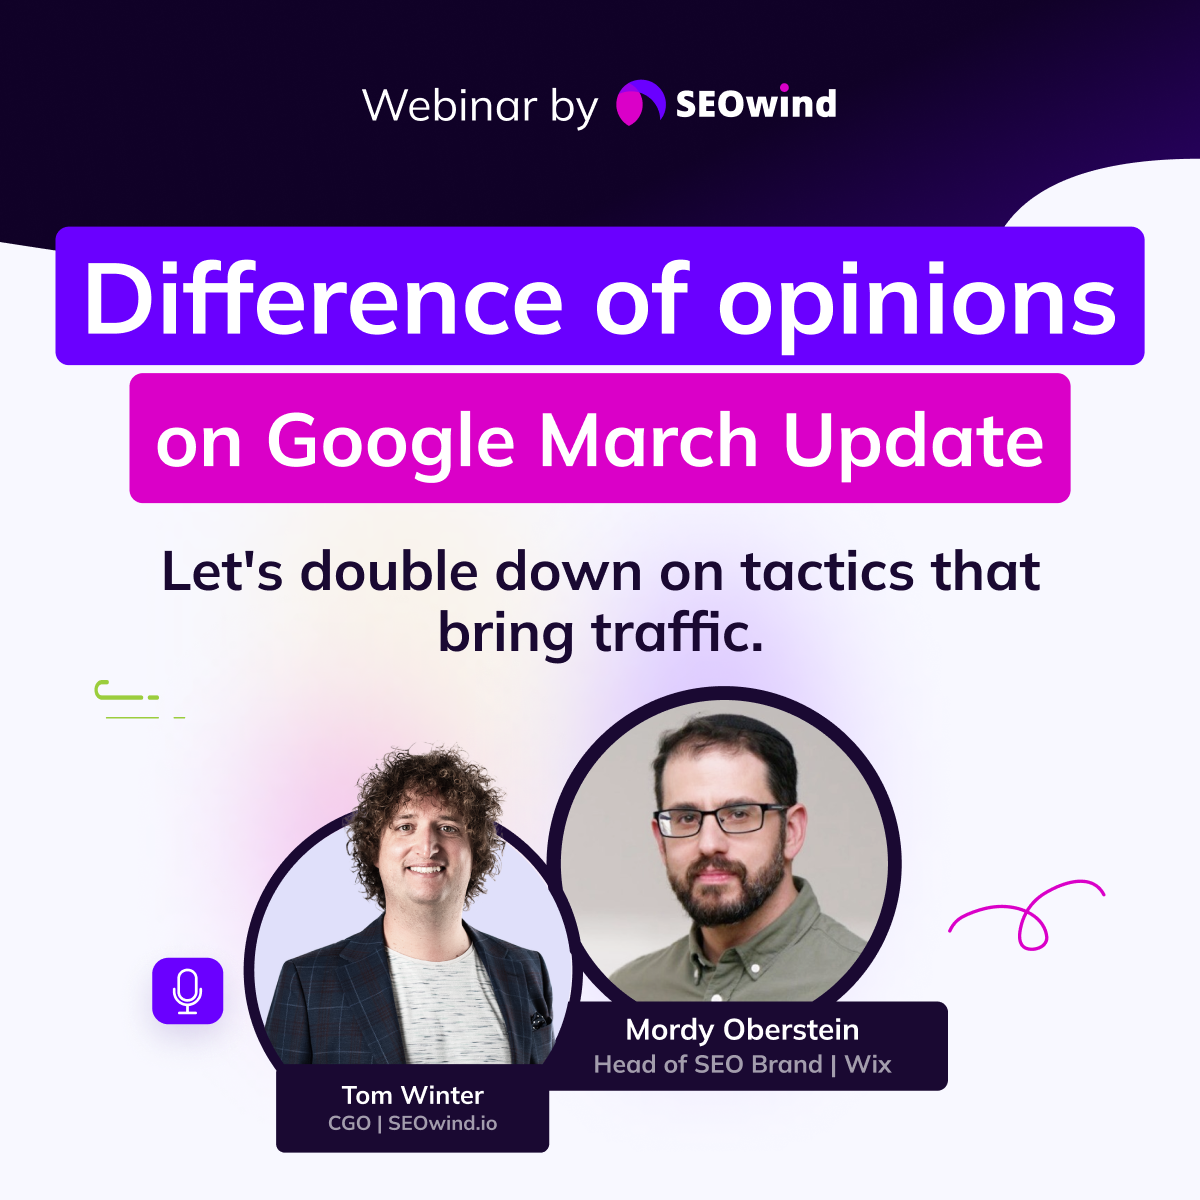 Difference of opinions on Google March Update. Tactics that bring traffic with Mordy Oberstein from Wix